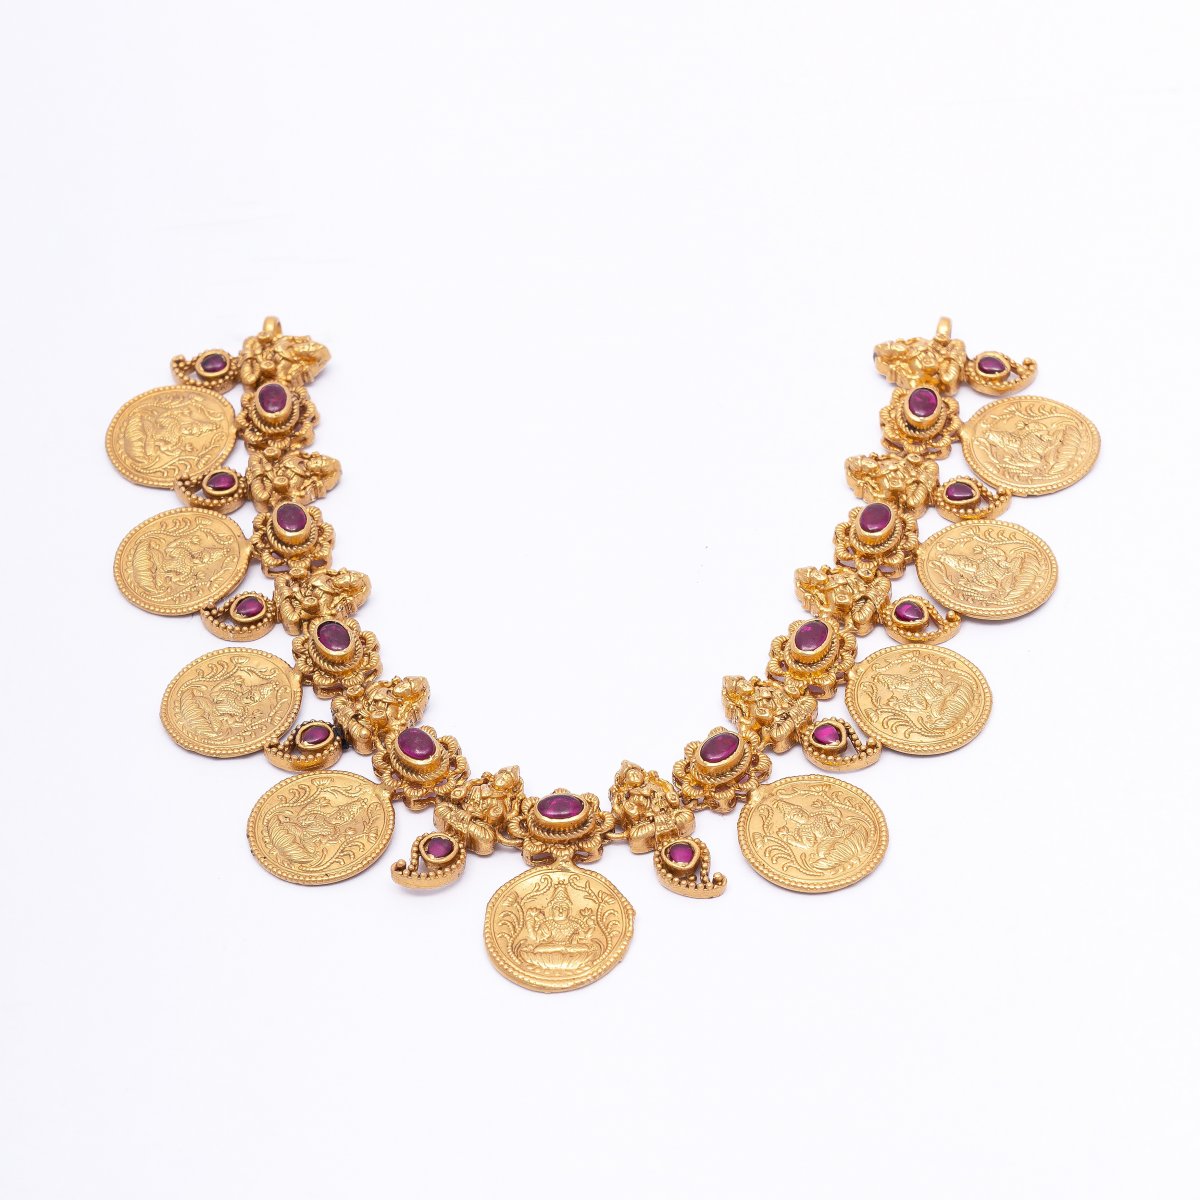 GOLD PLATED TRADITIONAL TEMPLE JEWELLERY LAXMI TEMPLE COIN NECKLACE 